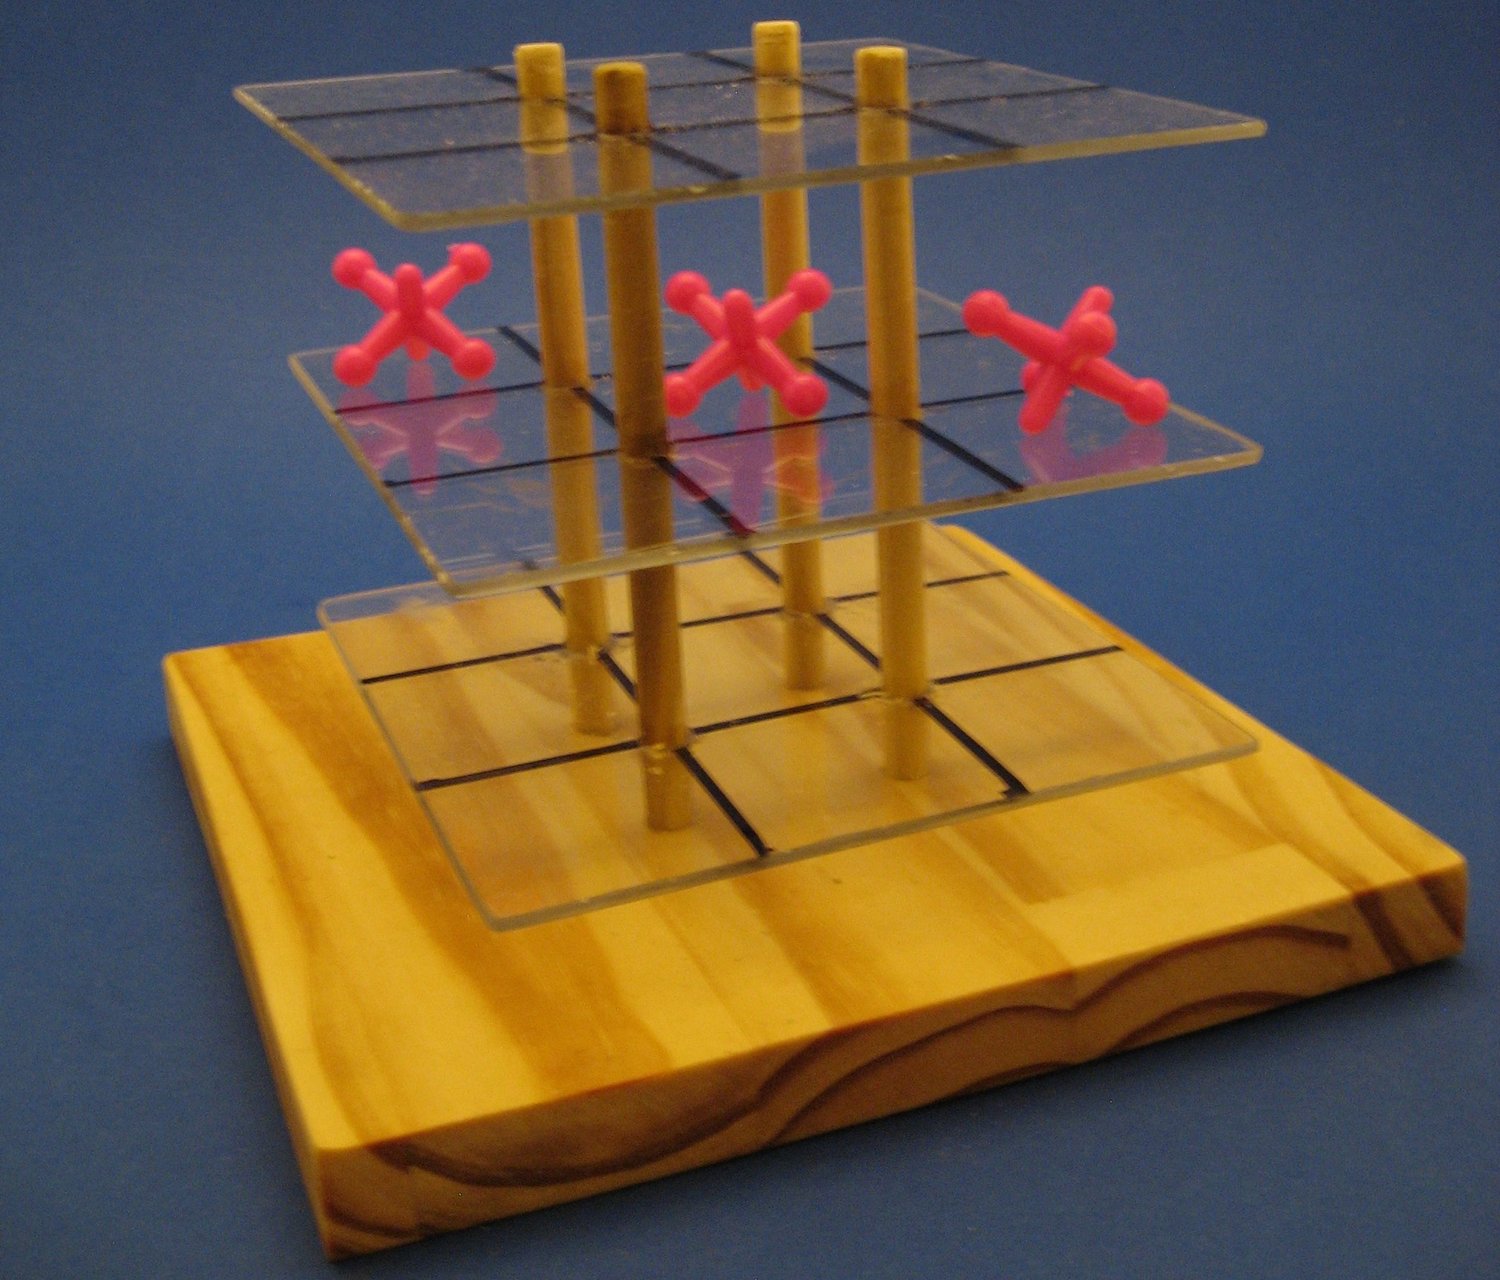 Three-dimensional tic-tac-toe can be played on three arrays of 3x3